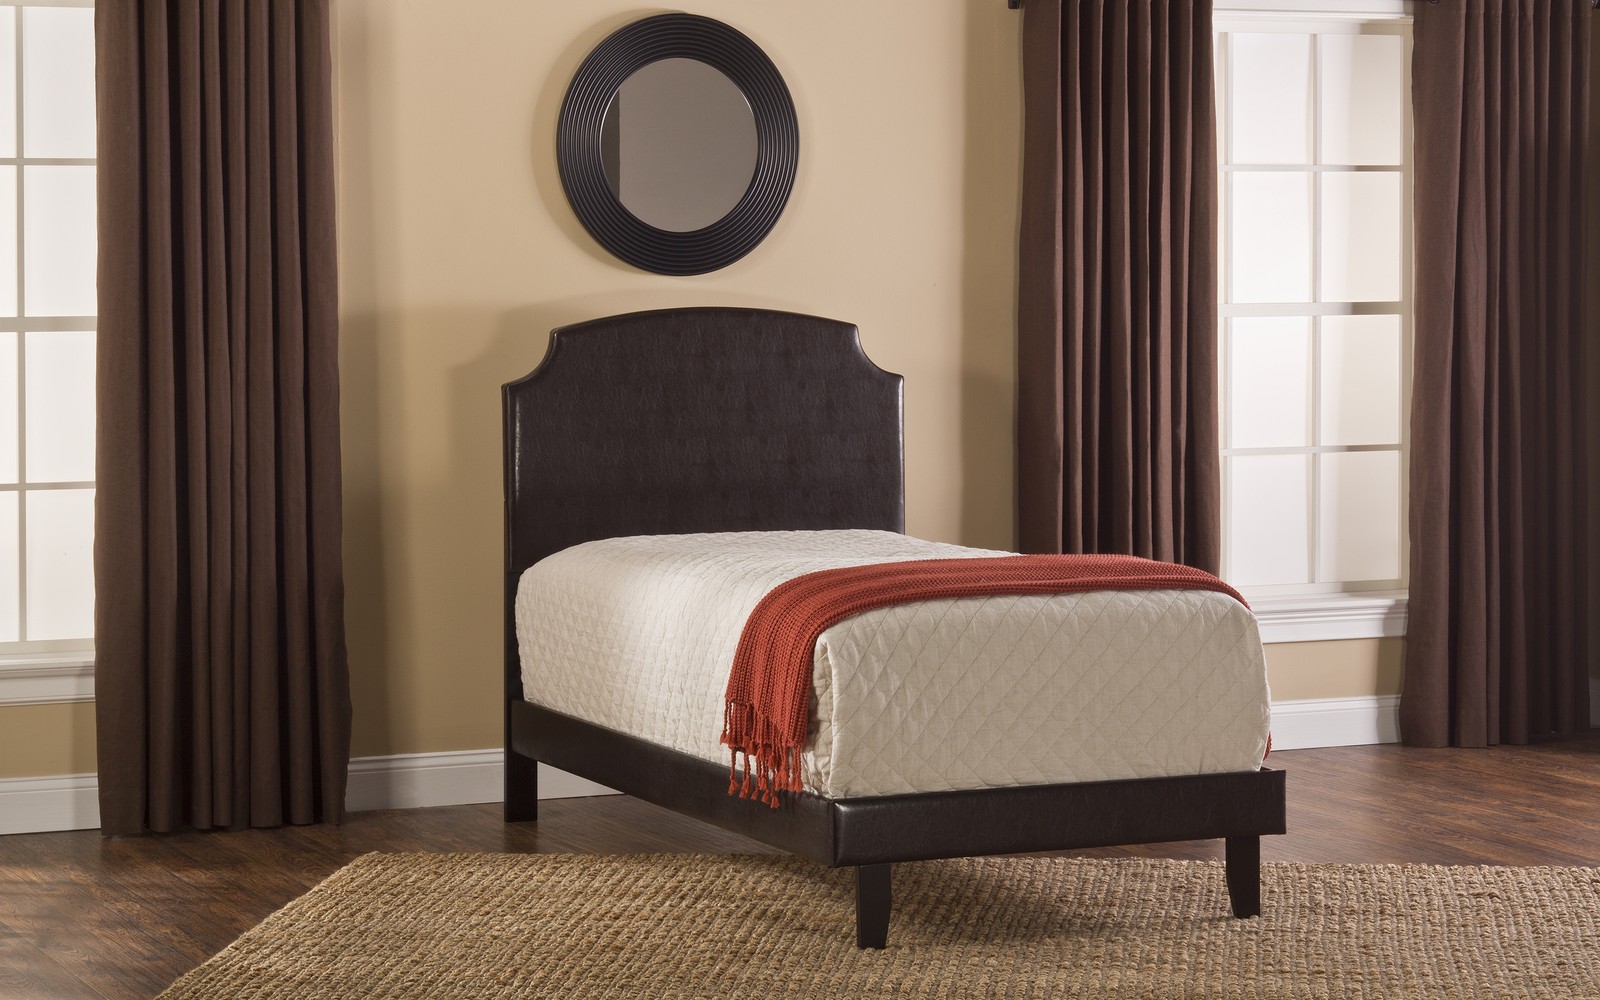 Hillsdale Lawler Bed - Brown Faux Leather